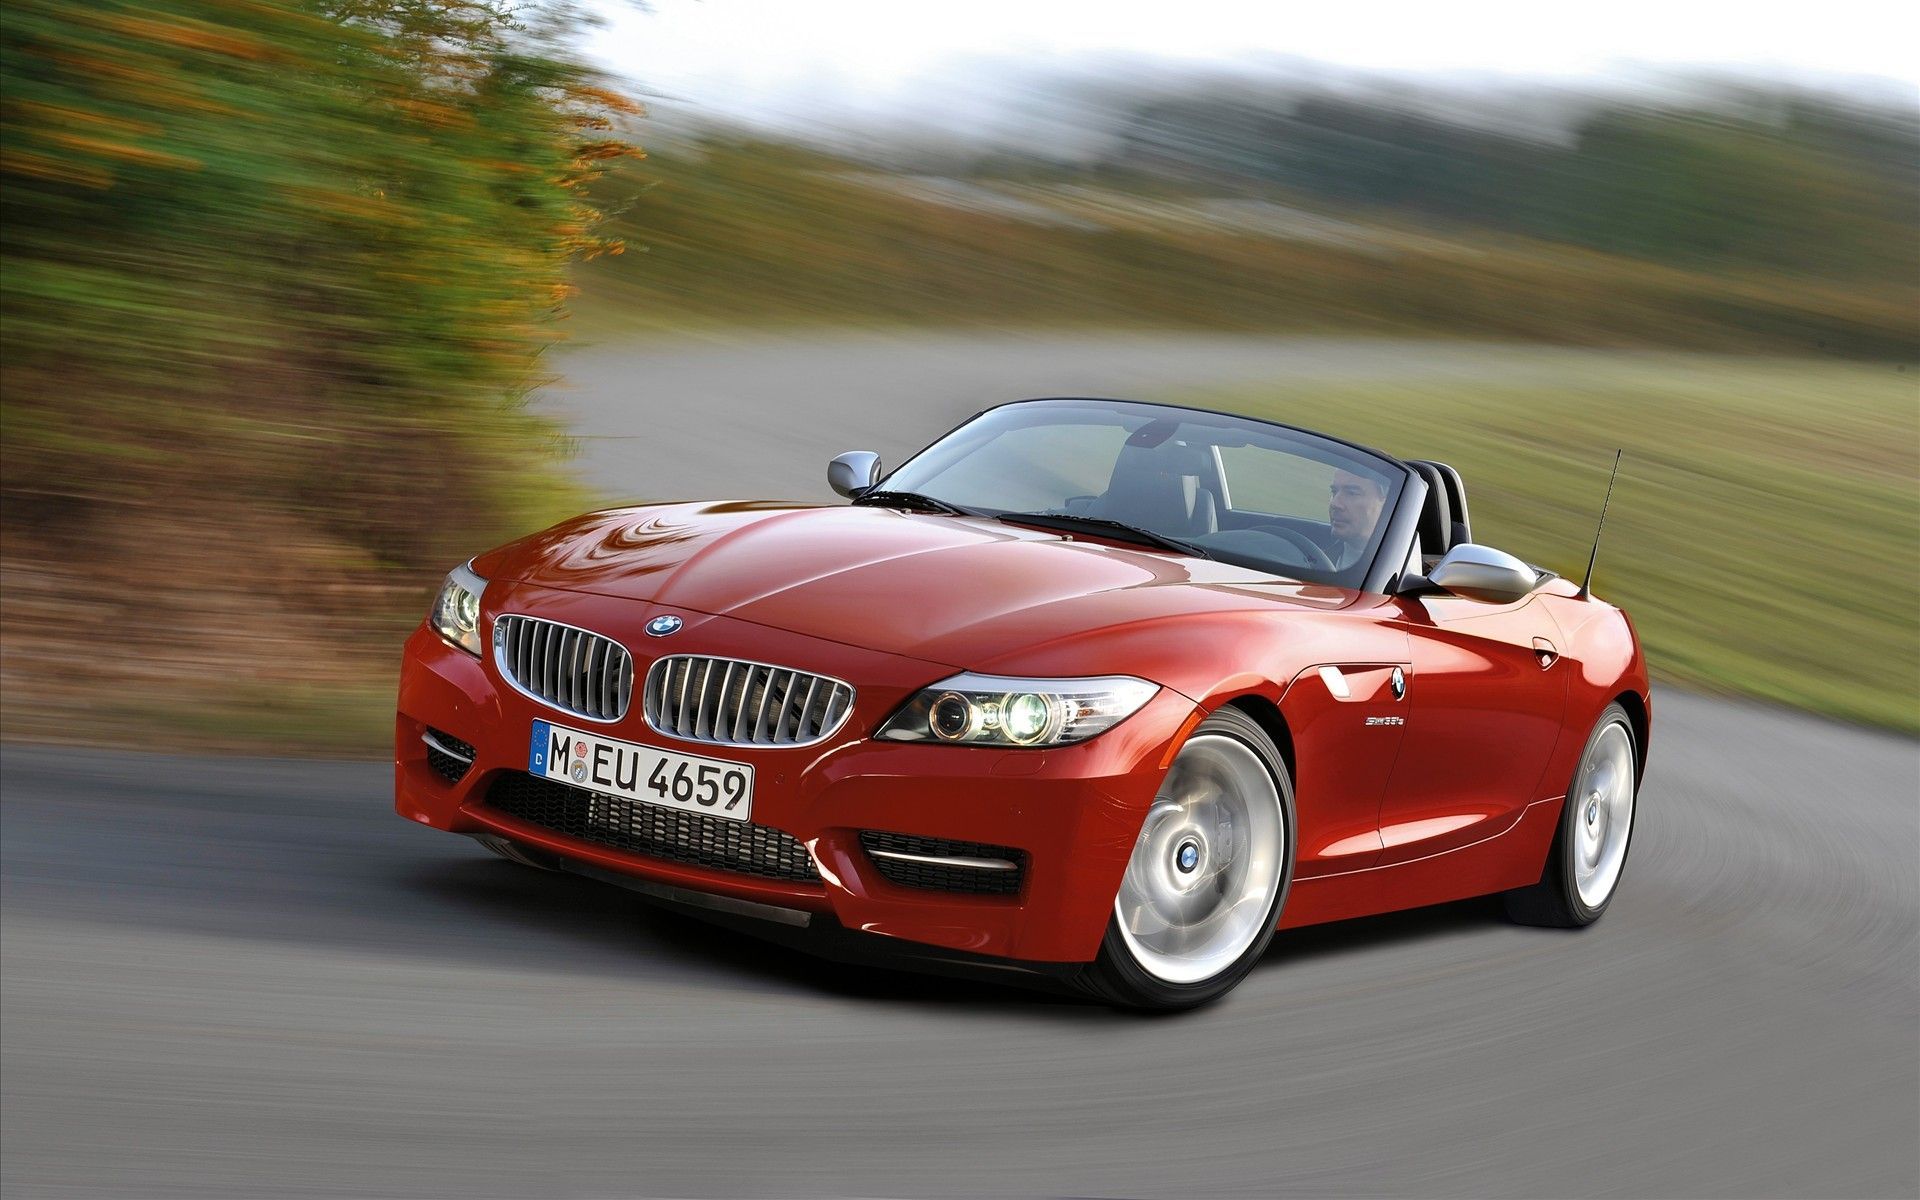 New BMW Z4 2011 Car Wallpapers | HD Wallpapers